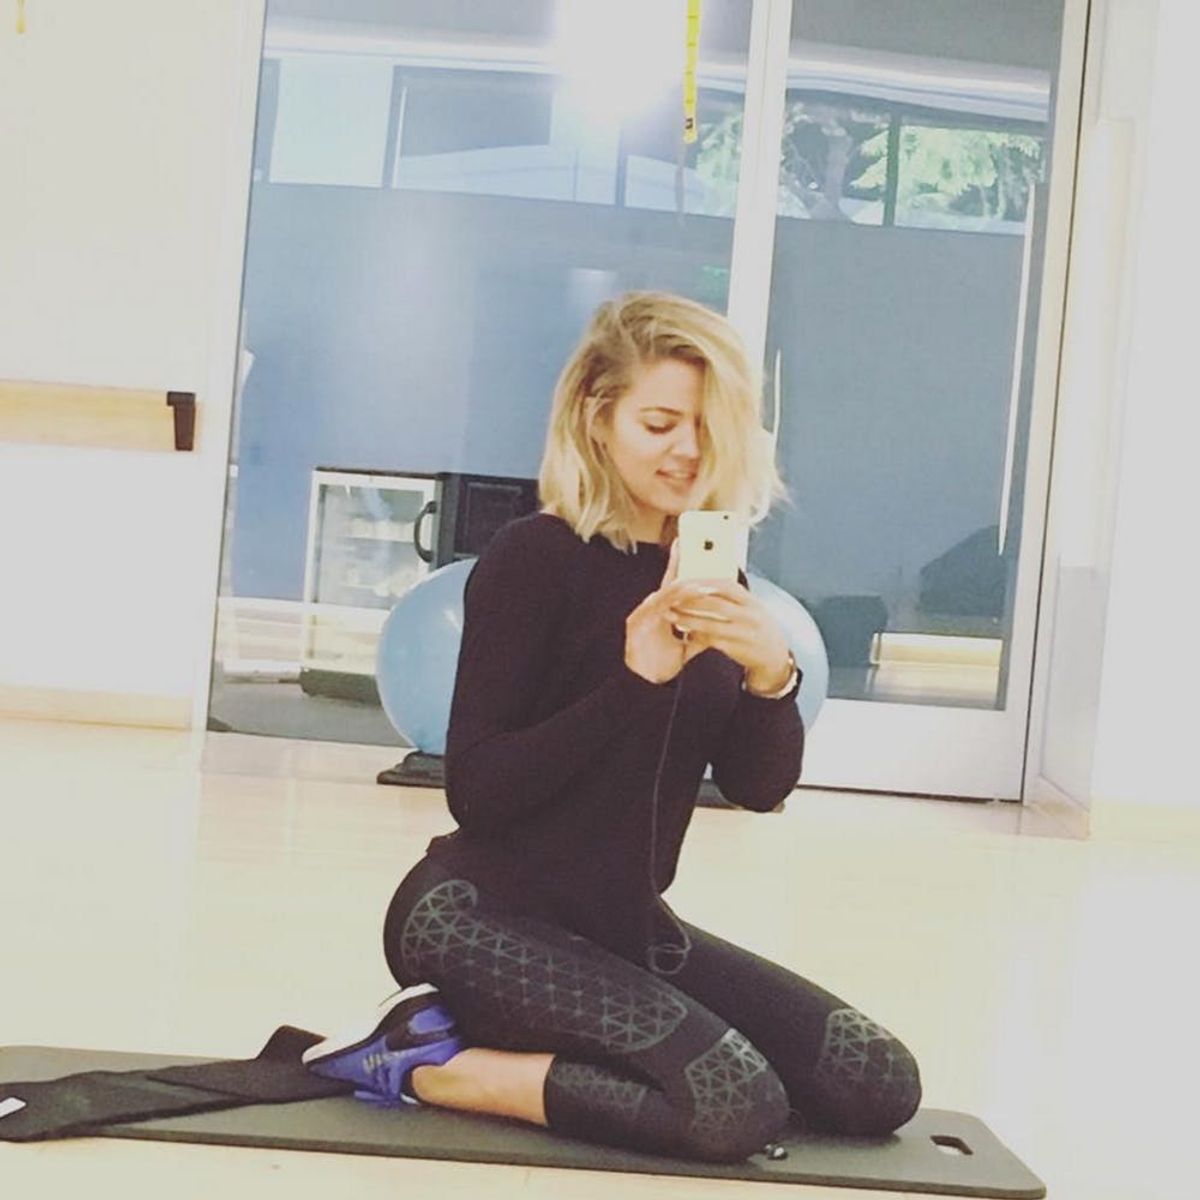 Khloe Kardashian’s Workout Playlist Will Inspire You to Hit the Gym ASAP